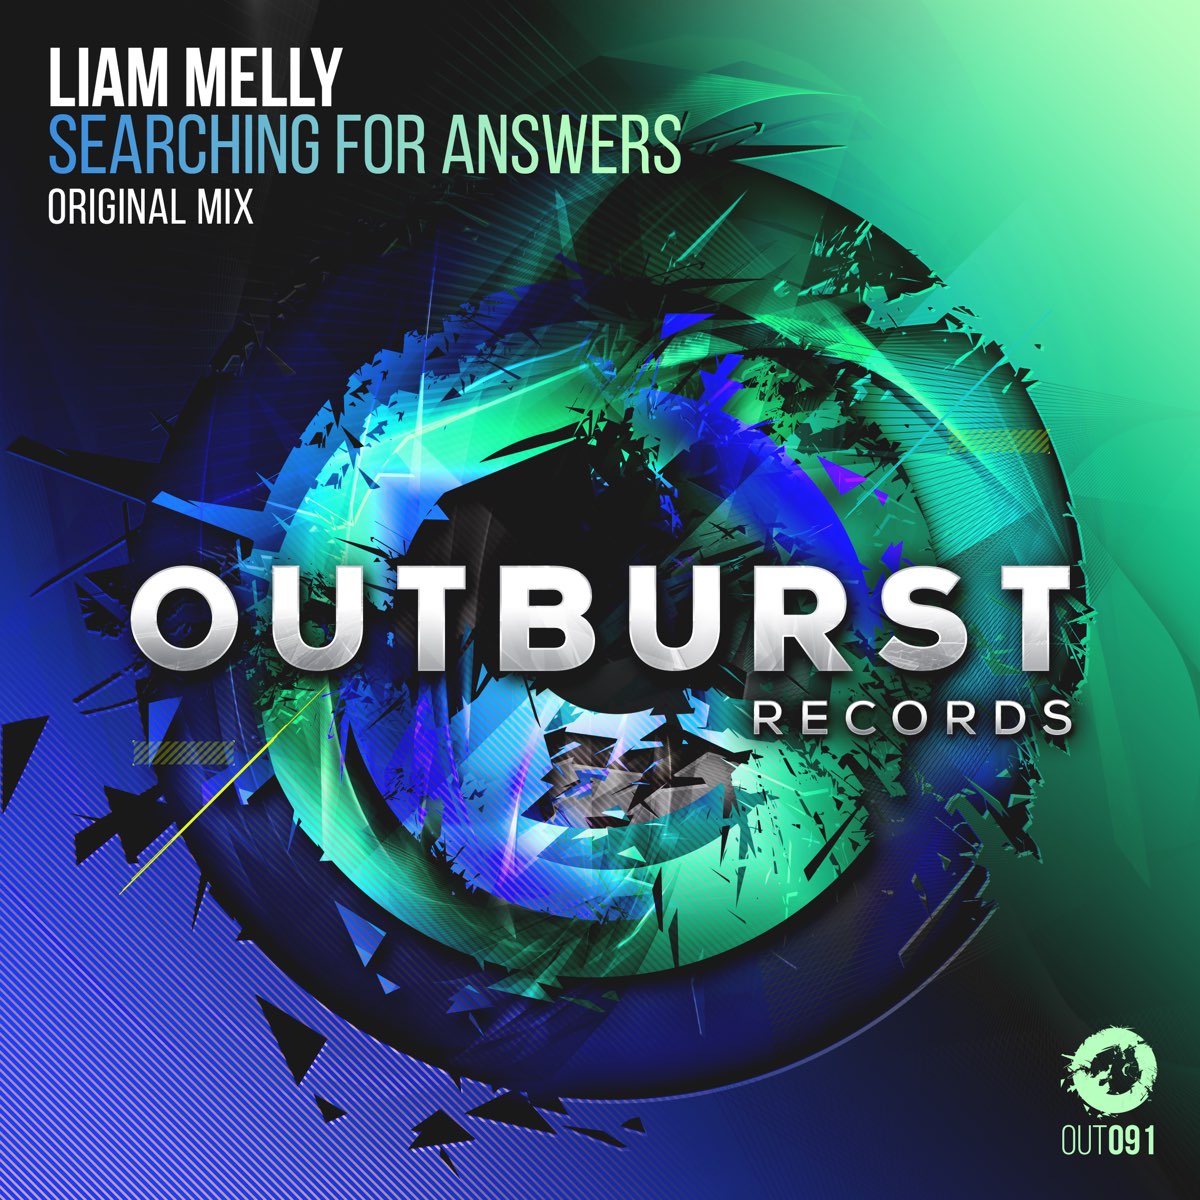 Mixed source. Liam Melly. Outburst. The outburst группа. Source Music.